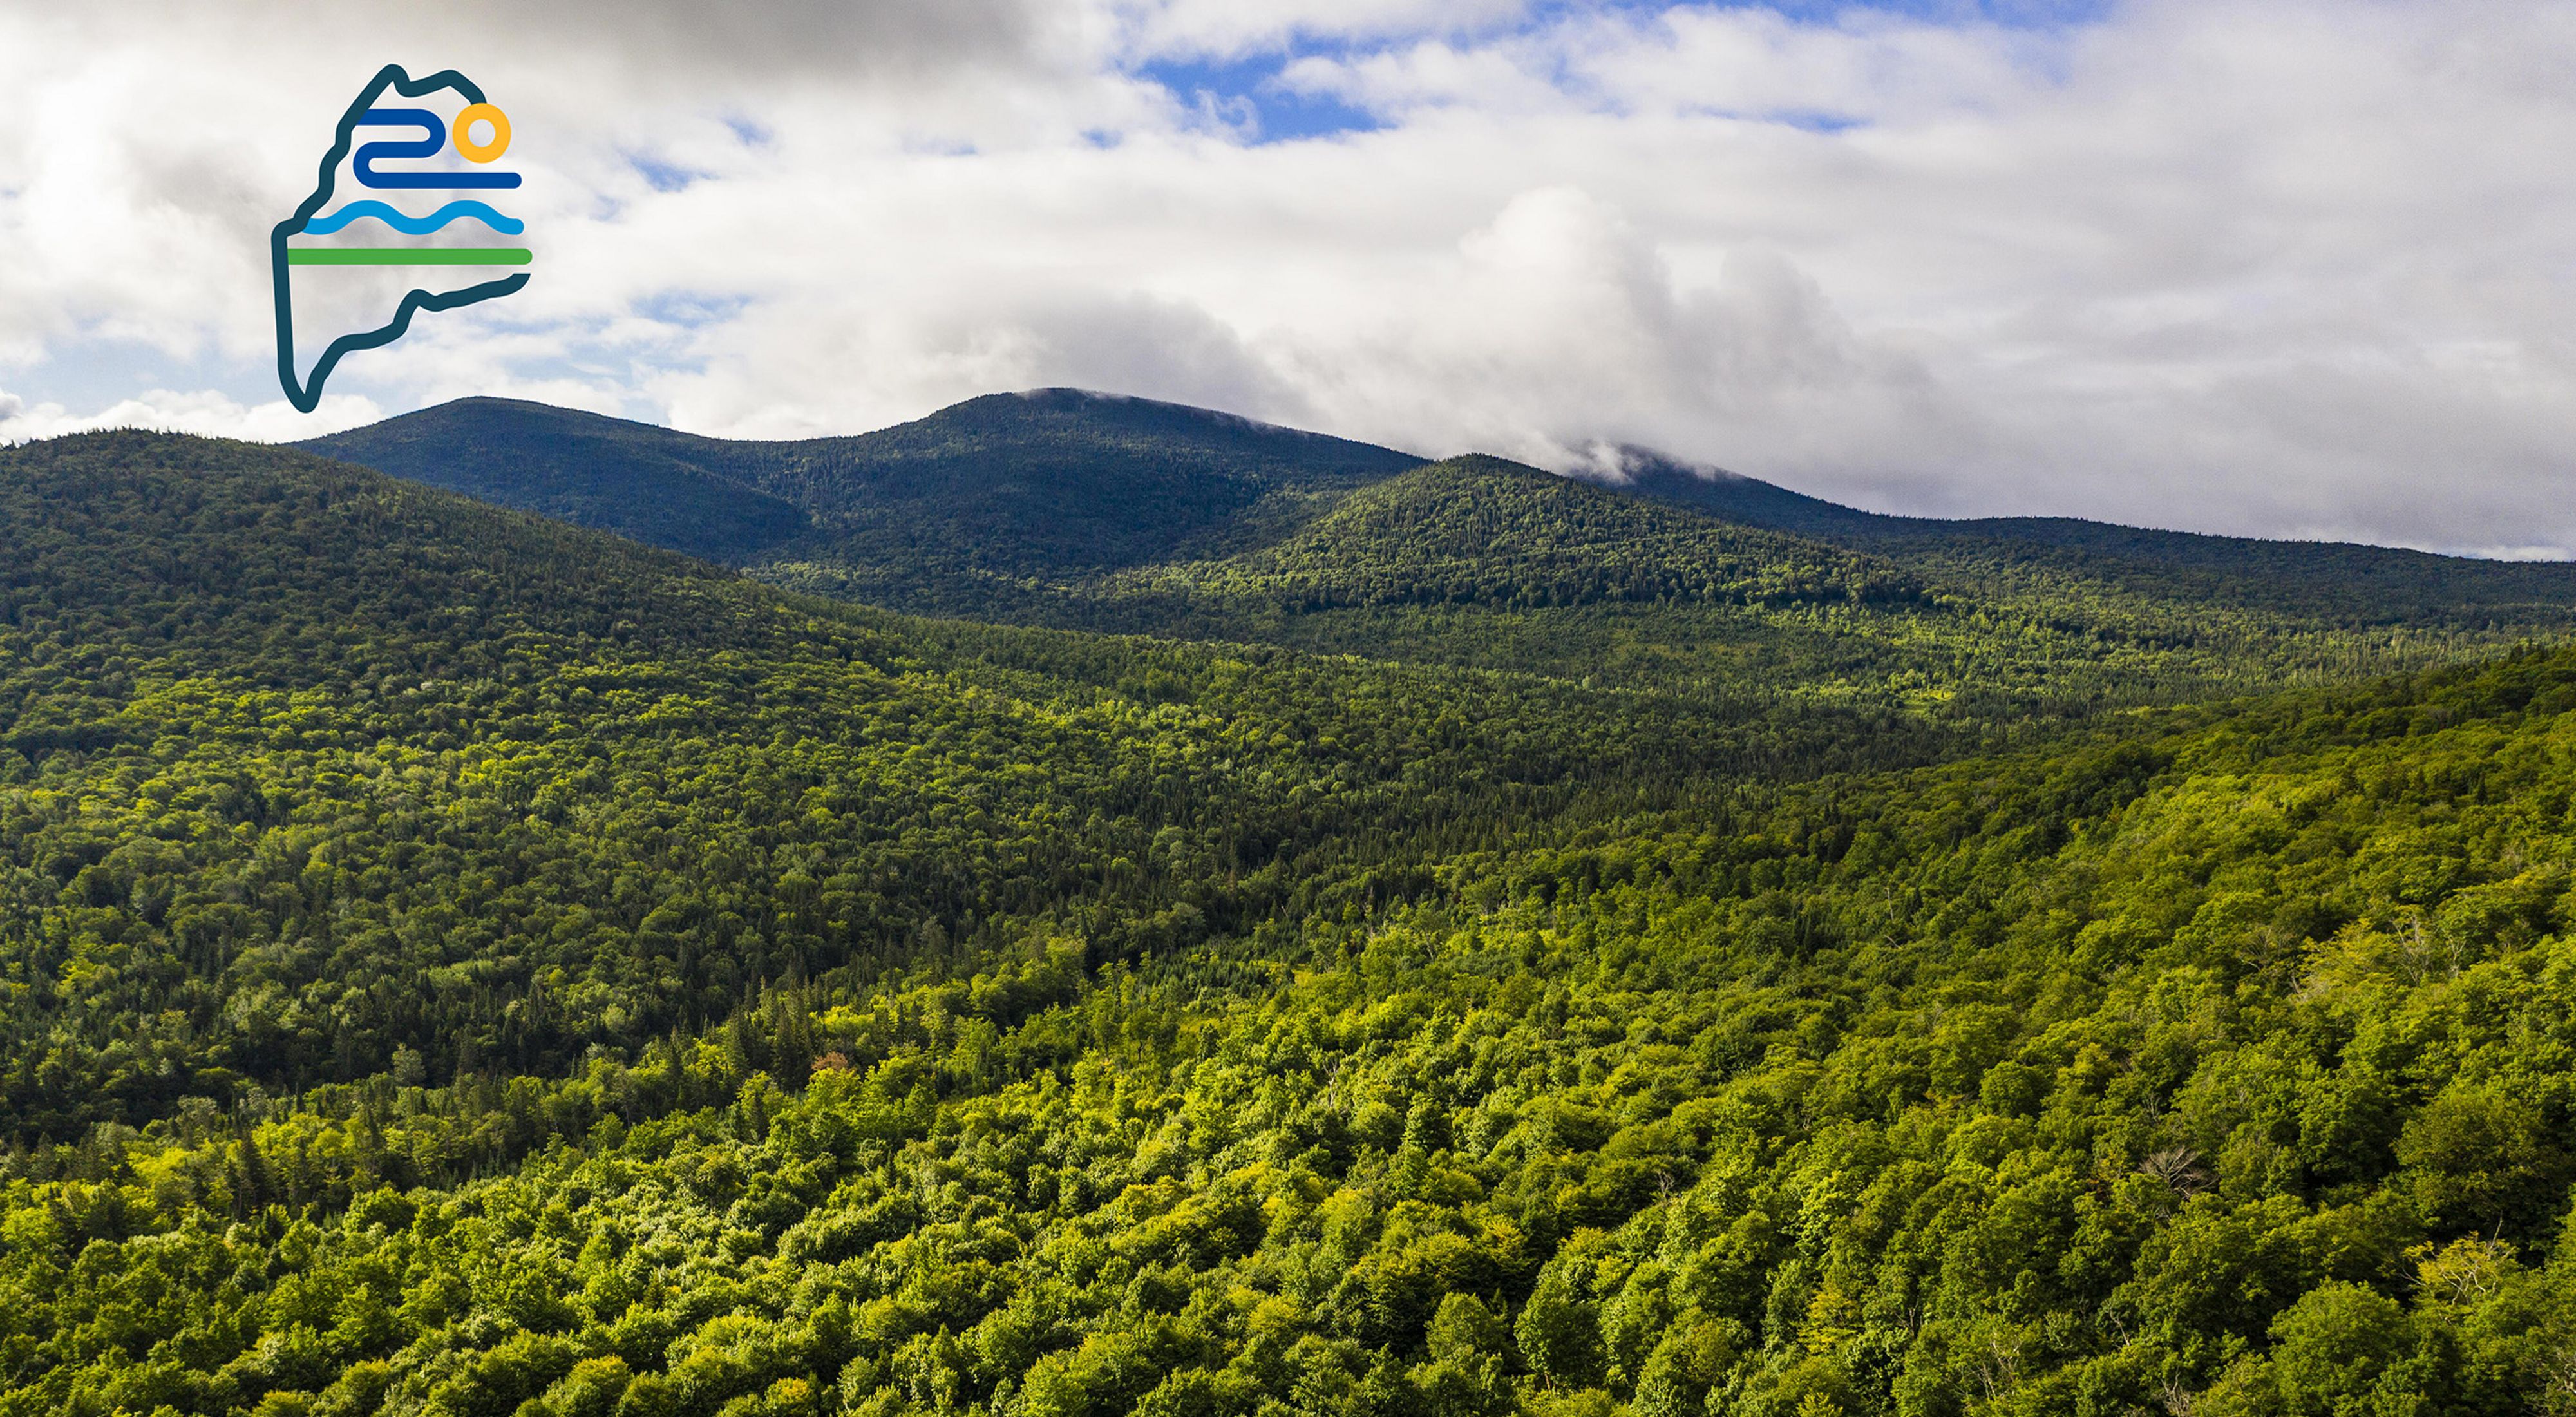 A vast green forest leads to tree-covered mountains in the distance.